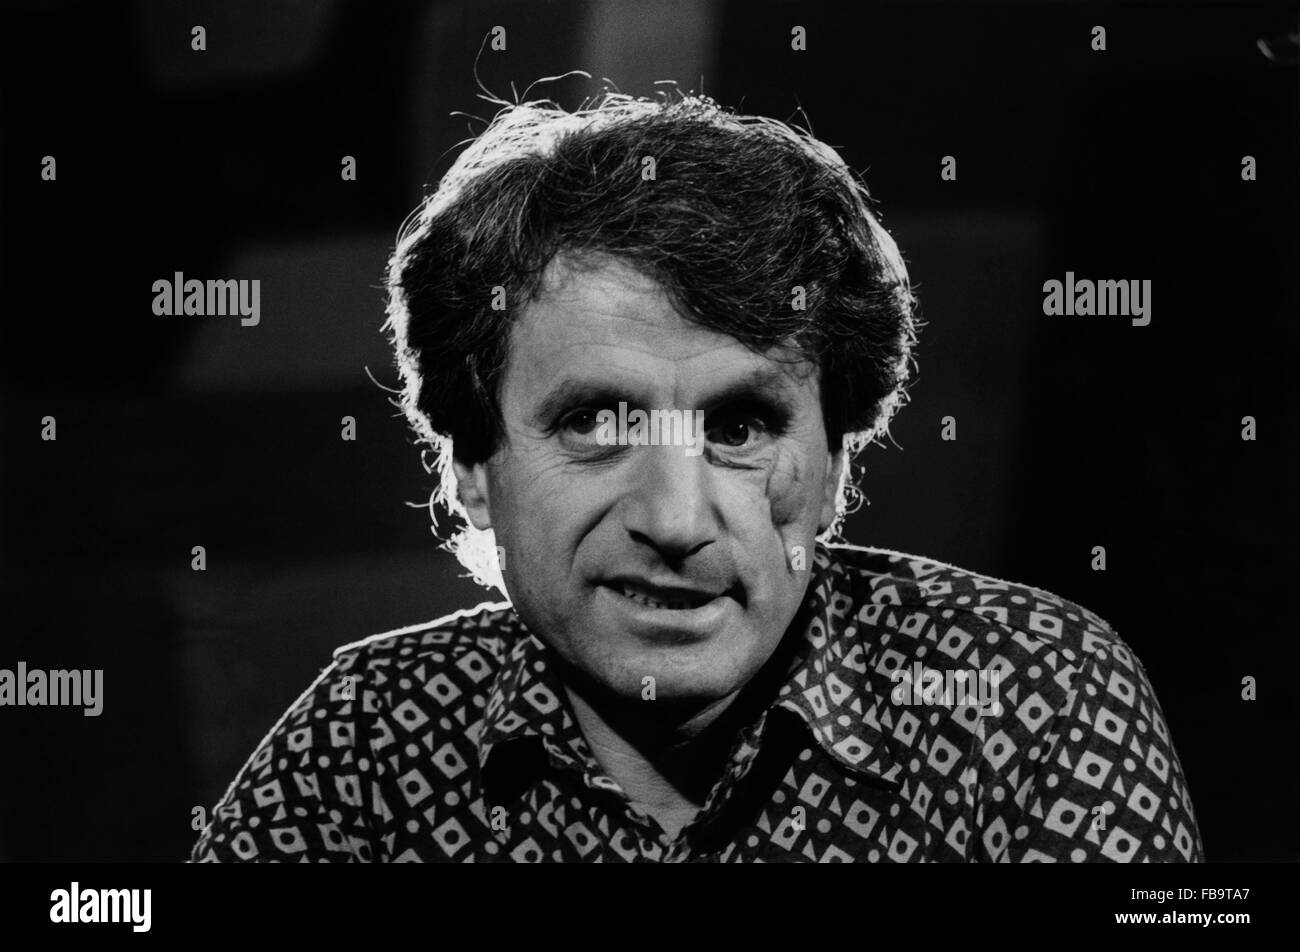 Iannis XENAKIS was a Romanian-born Greek ethnic, naturalized French composer, music theorist, and architect-engineer. He is commonly recognized as one of the most important post-war avant-garde composers. -  1972  -  France / Ile-de-France (region) / Paris  -  Iannis XENAKIS was a Romanian-born Greek ethnic, naturalized French composer, music theorist, and architect-engineer. He is commonly recognized as one of the most important post-war avant-garde composers. -  Portrait of Iannis XENAKIS ; - Interview at the Maison de la Radio ; - 1972 ;  - Credit :   ;   -  Philippe Gras / Le Pictorium Stock Photo